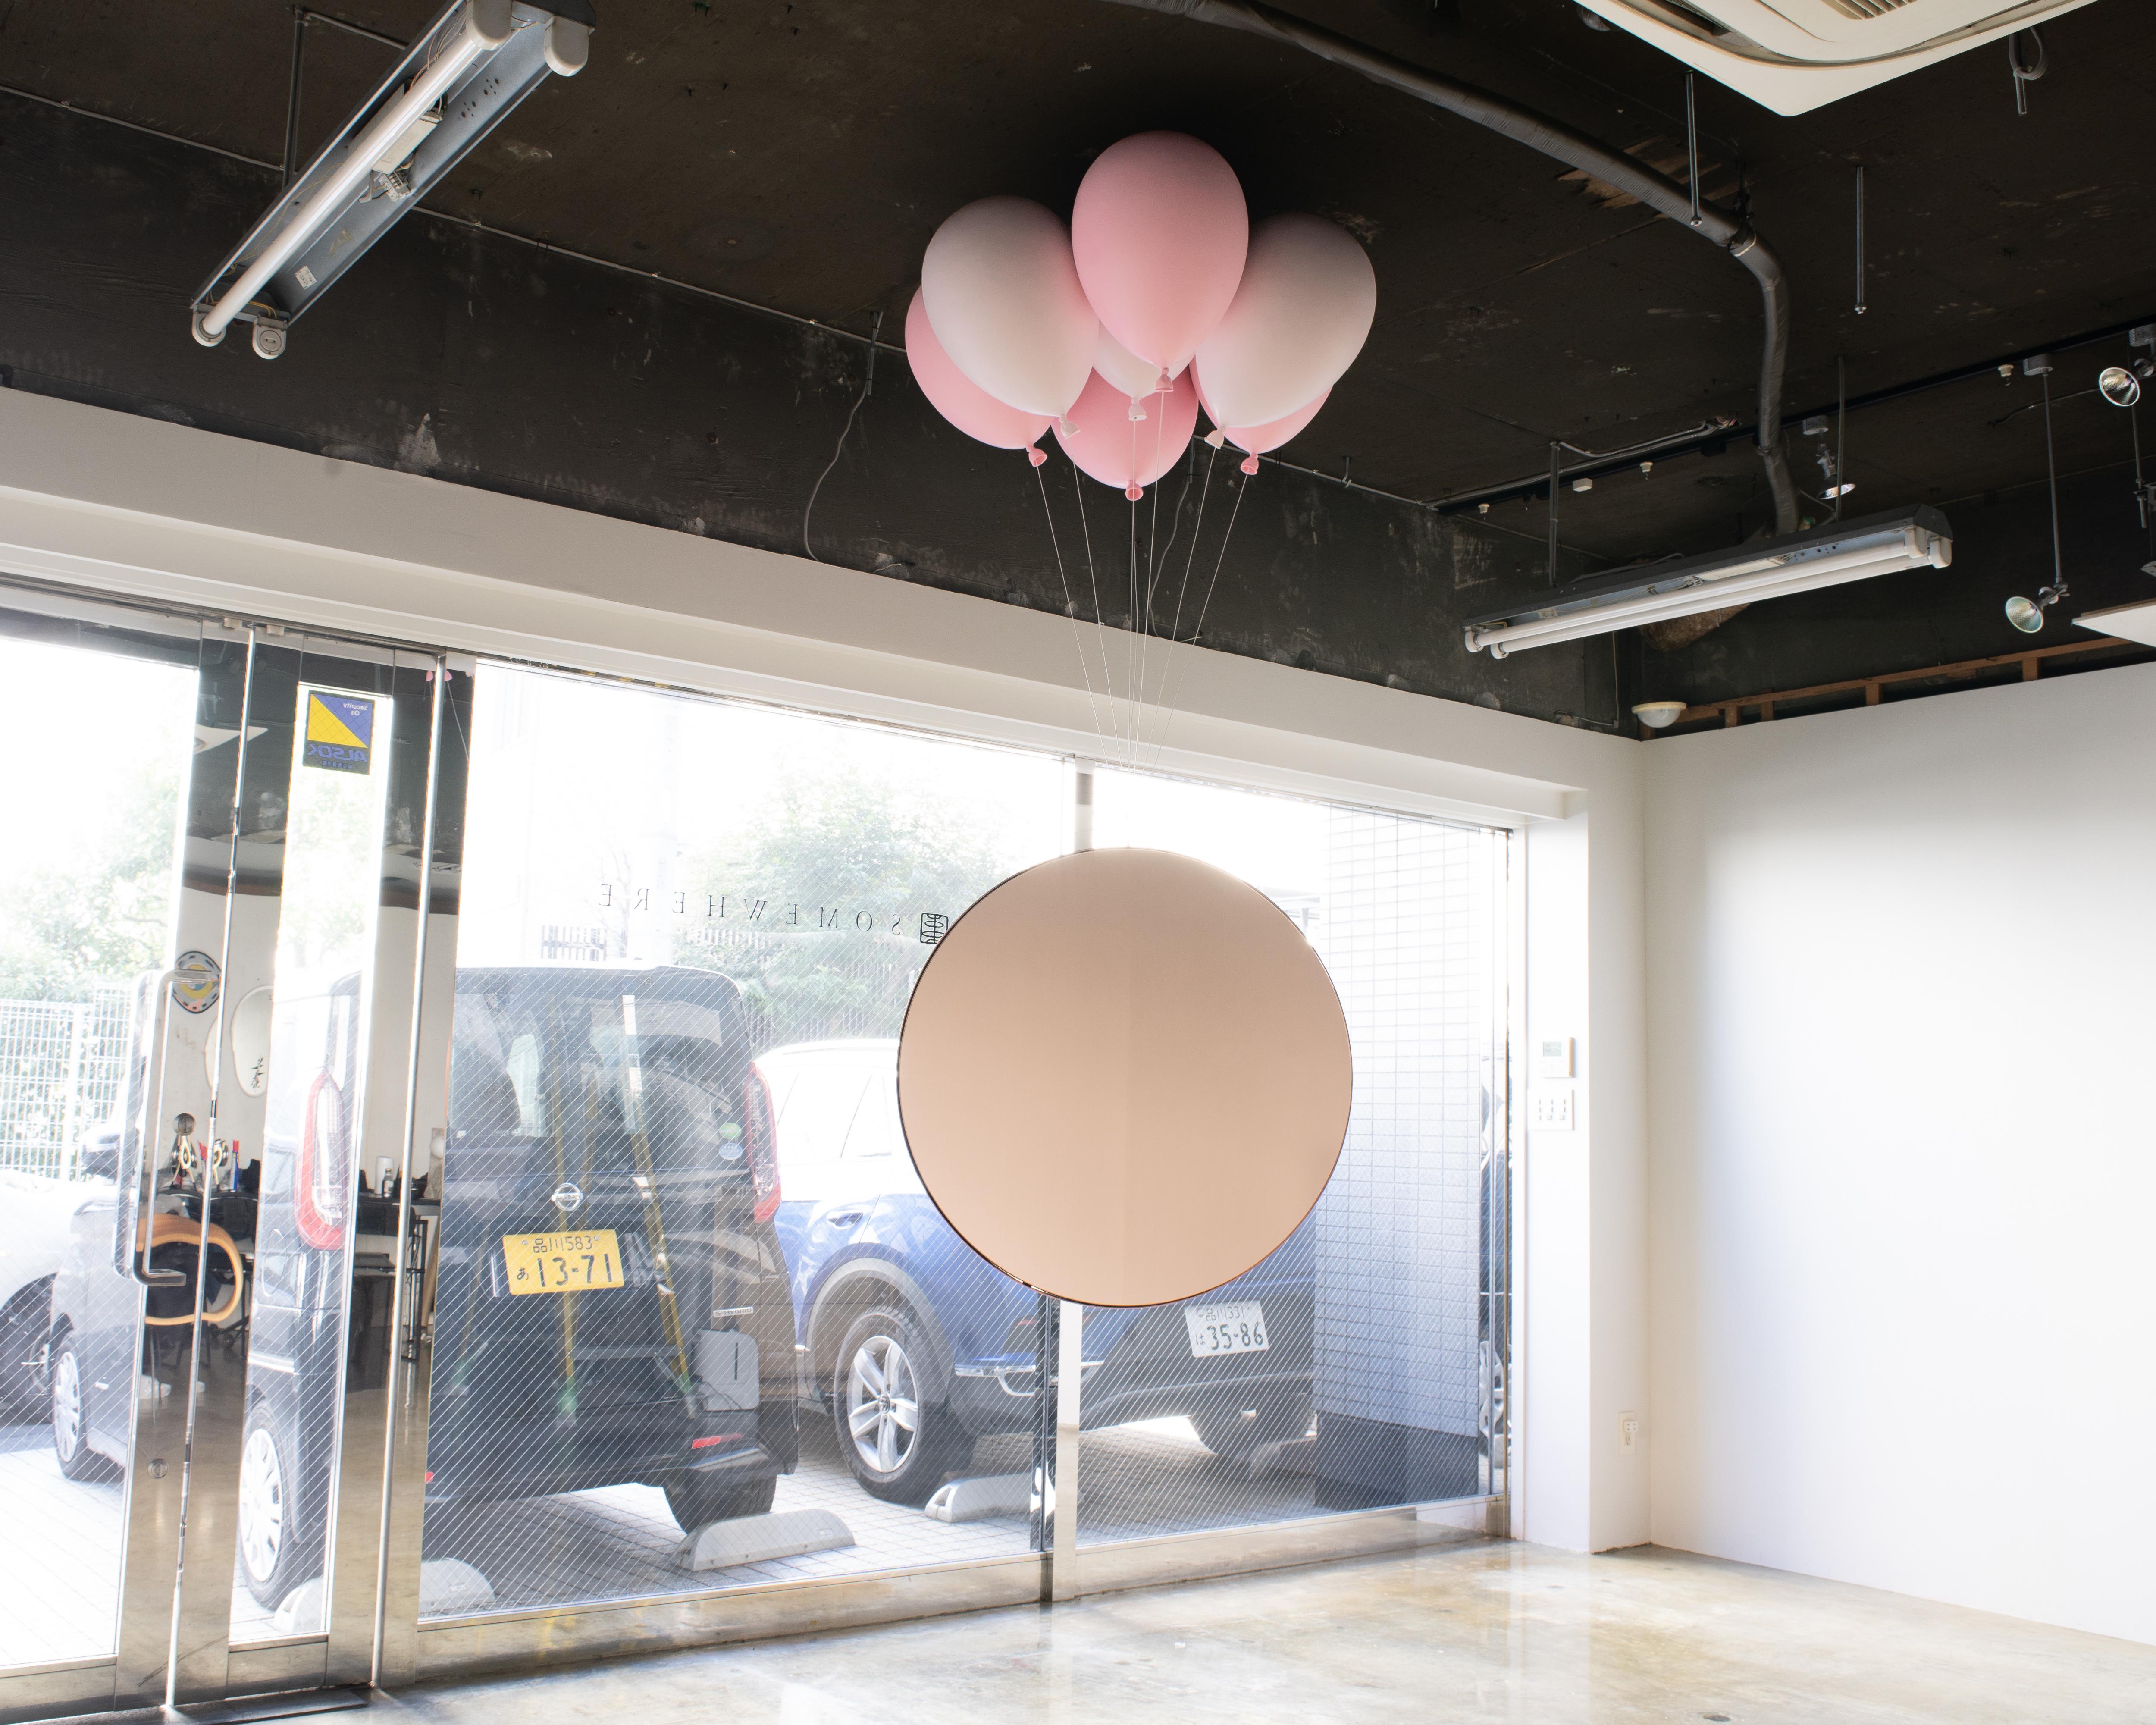 Balloon bench designed by Satoshi Itasaka of h220430
This is hanging mirror installed to ceiling. Made up of 7balloons and mirror.
Balloon is FRP, thread is steel wire. 
Color of balloons is able to arrange to your request. Mirror Dimension and